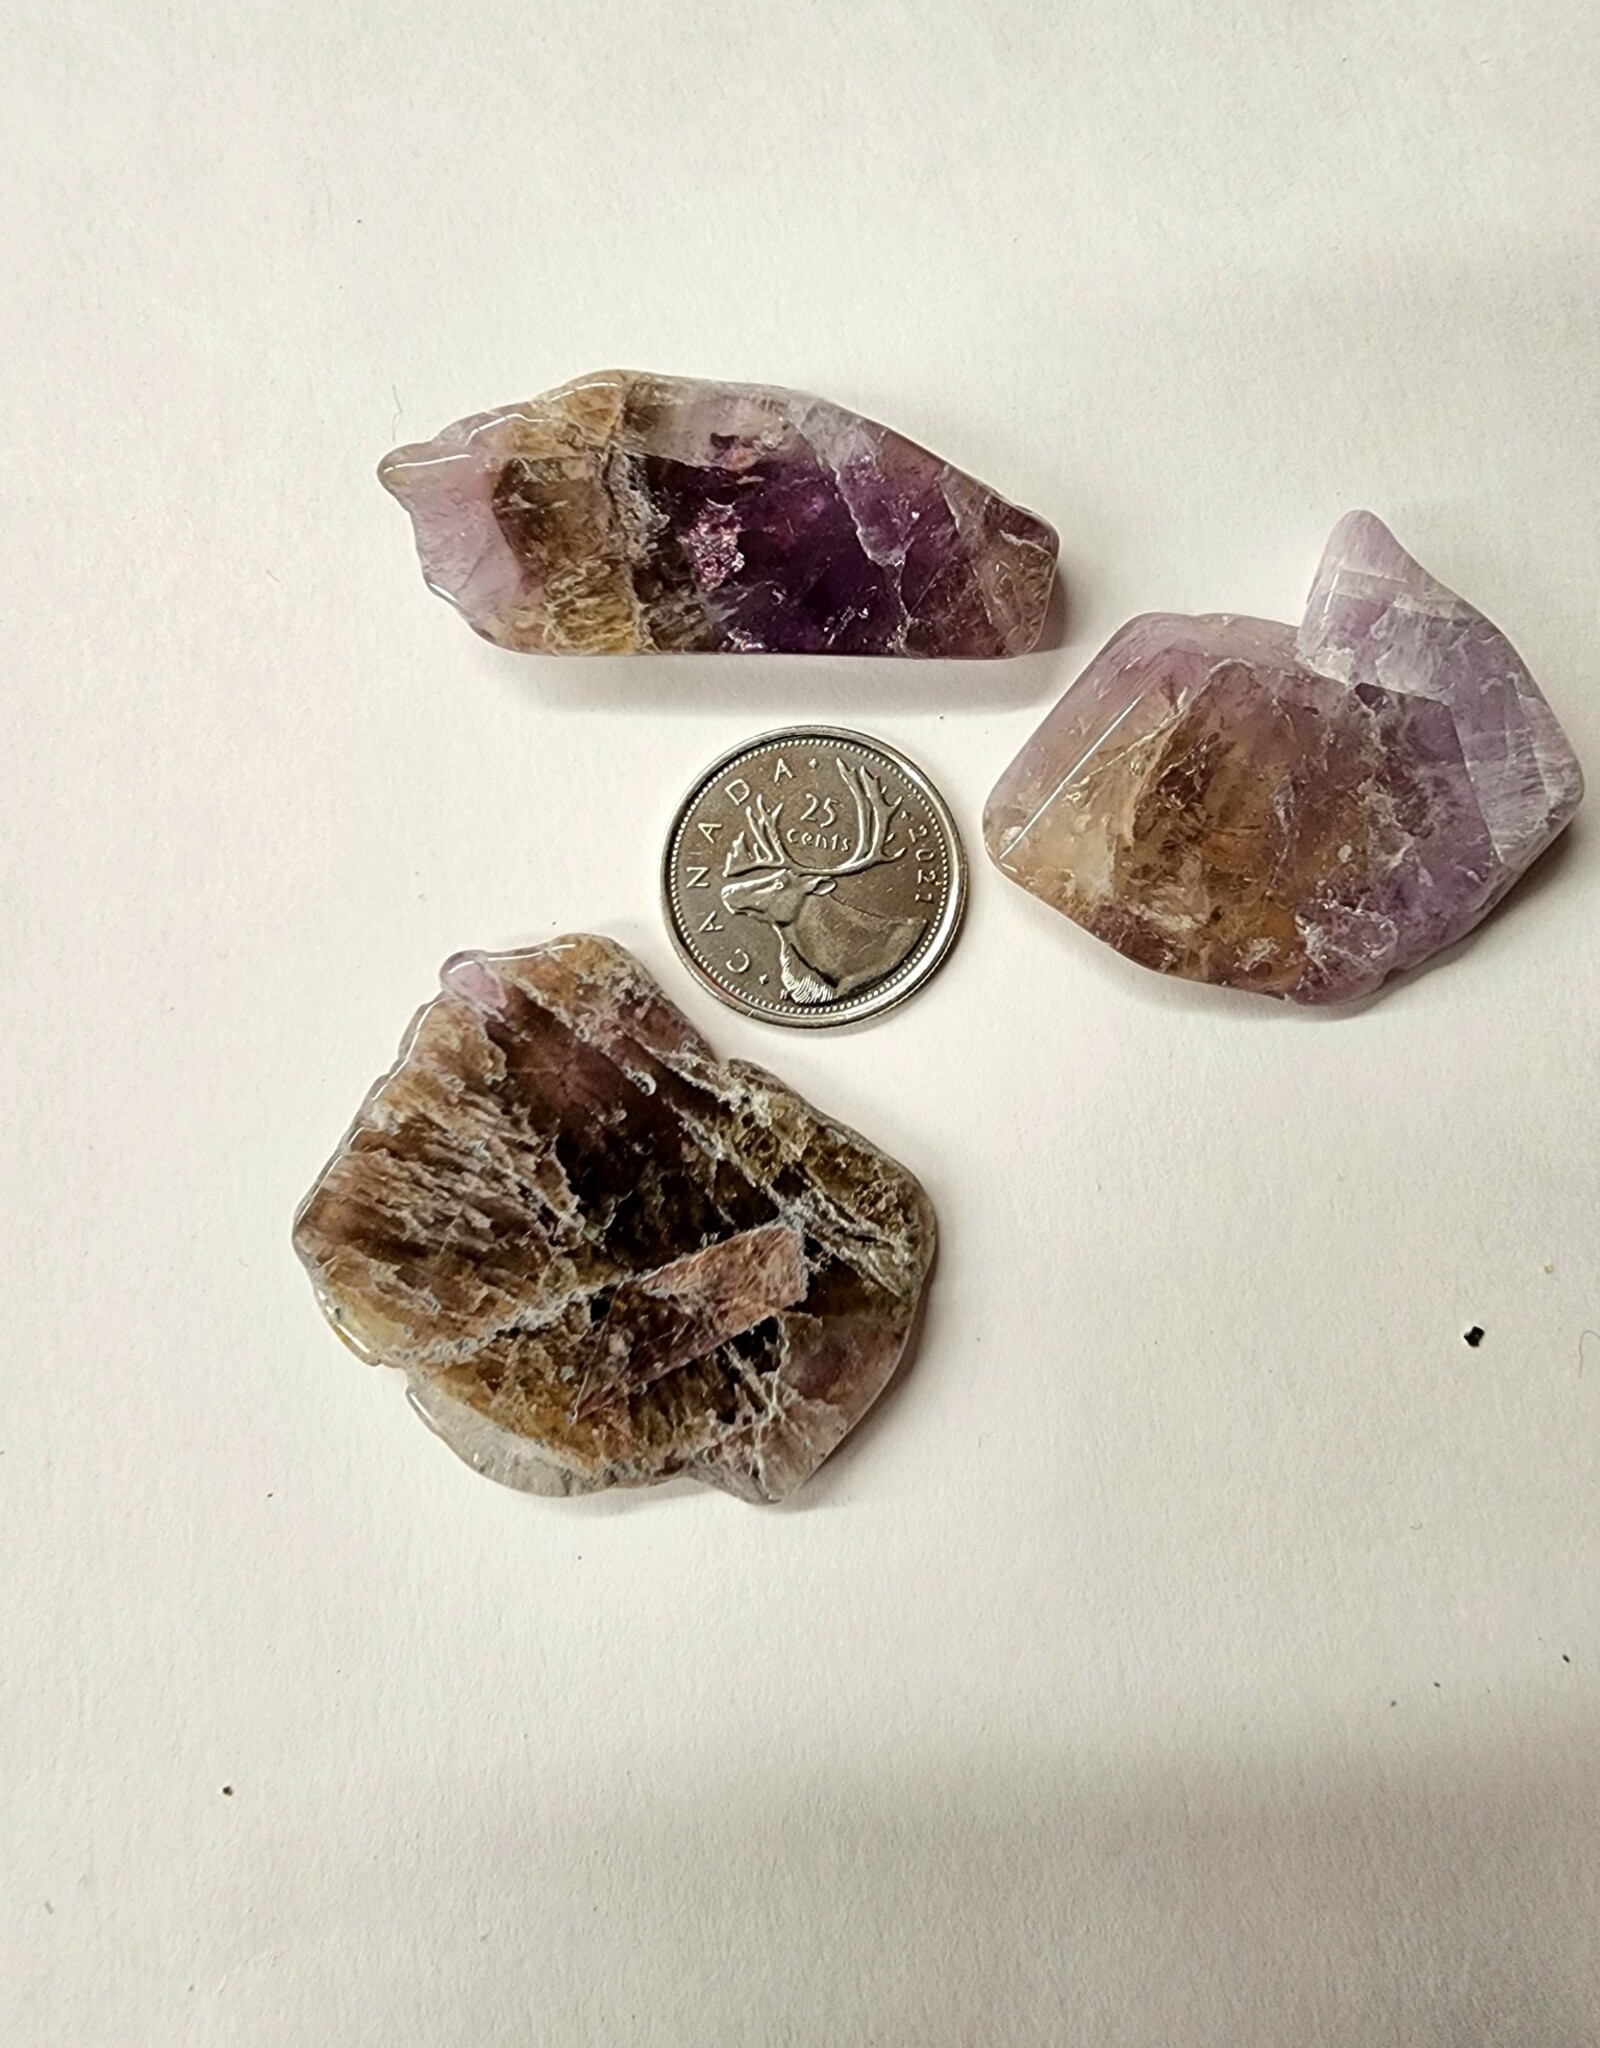 Super 7 / Melody's Stone Polished Slices